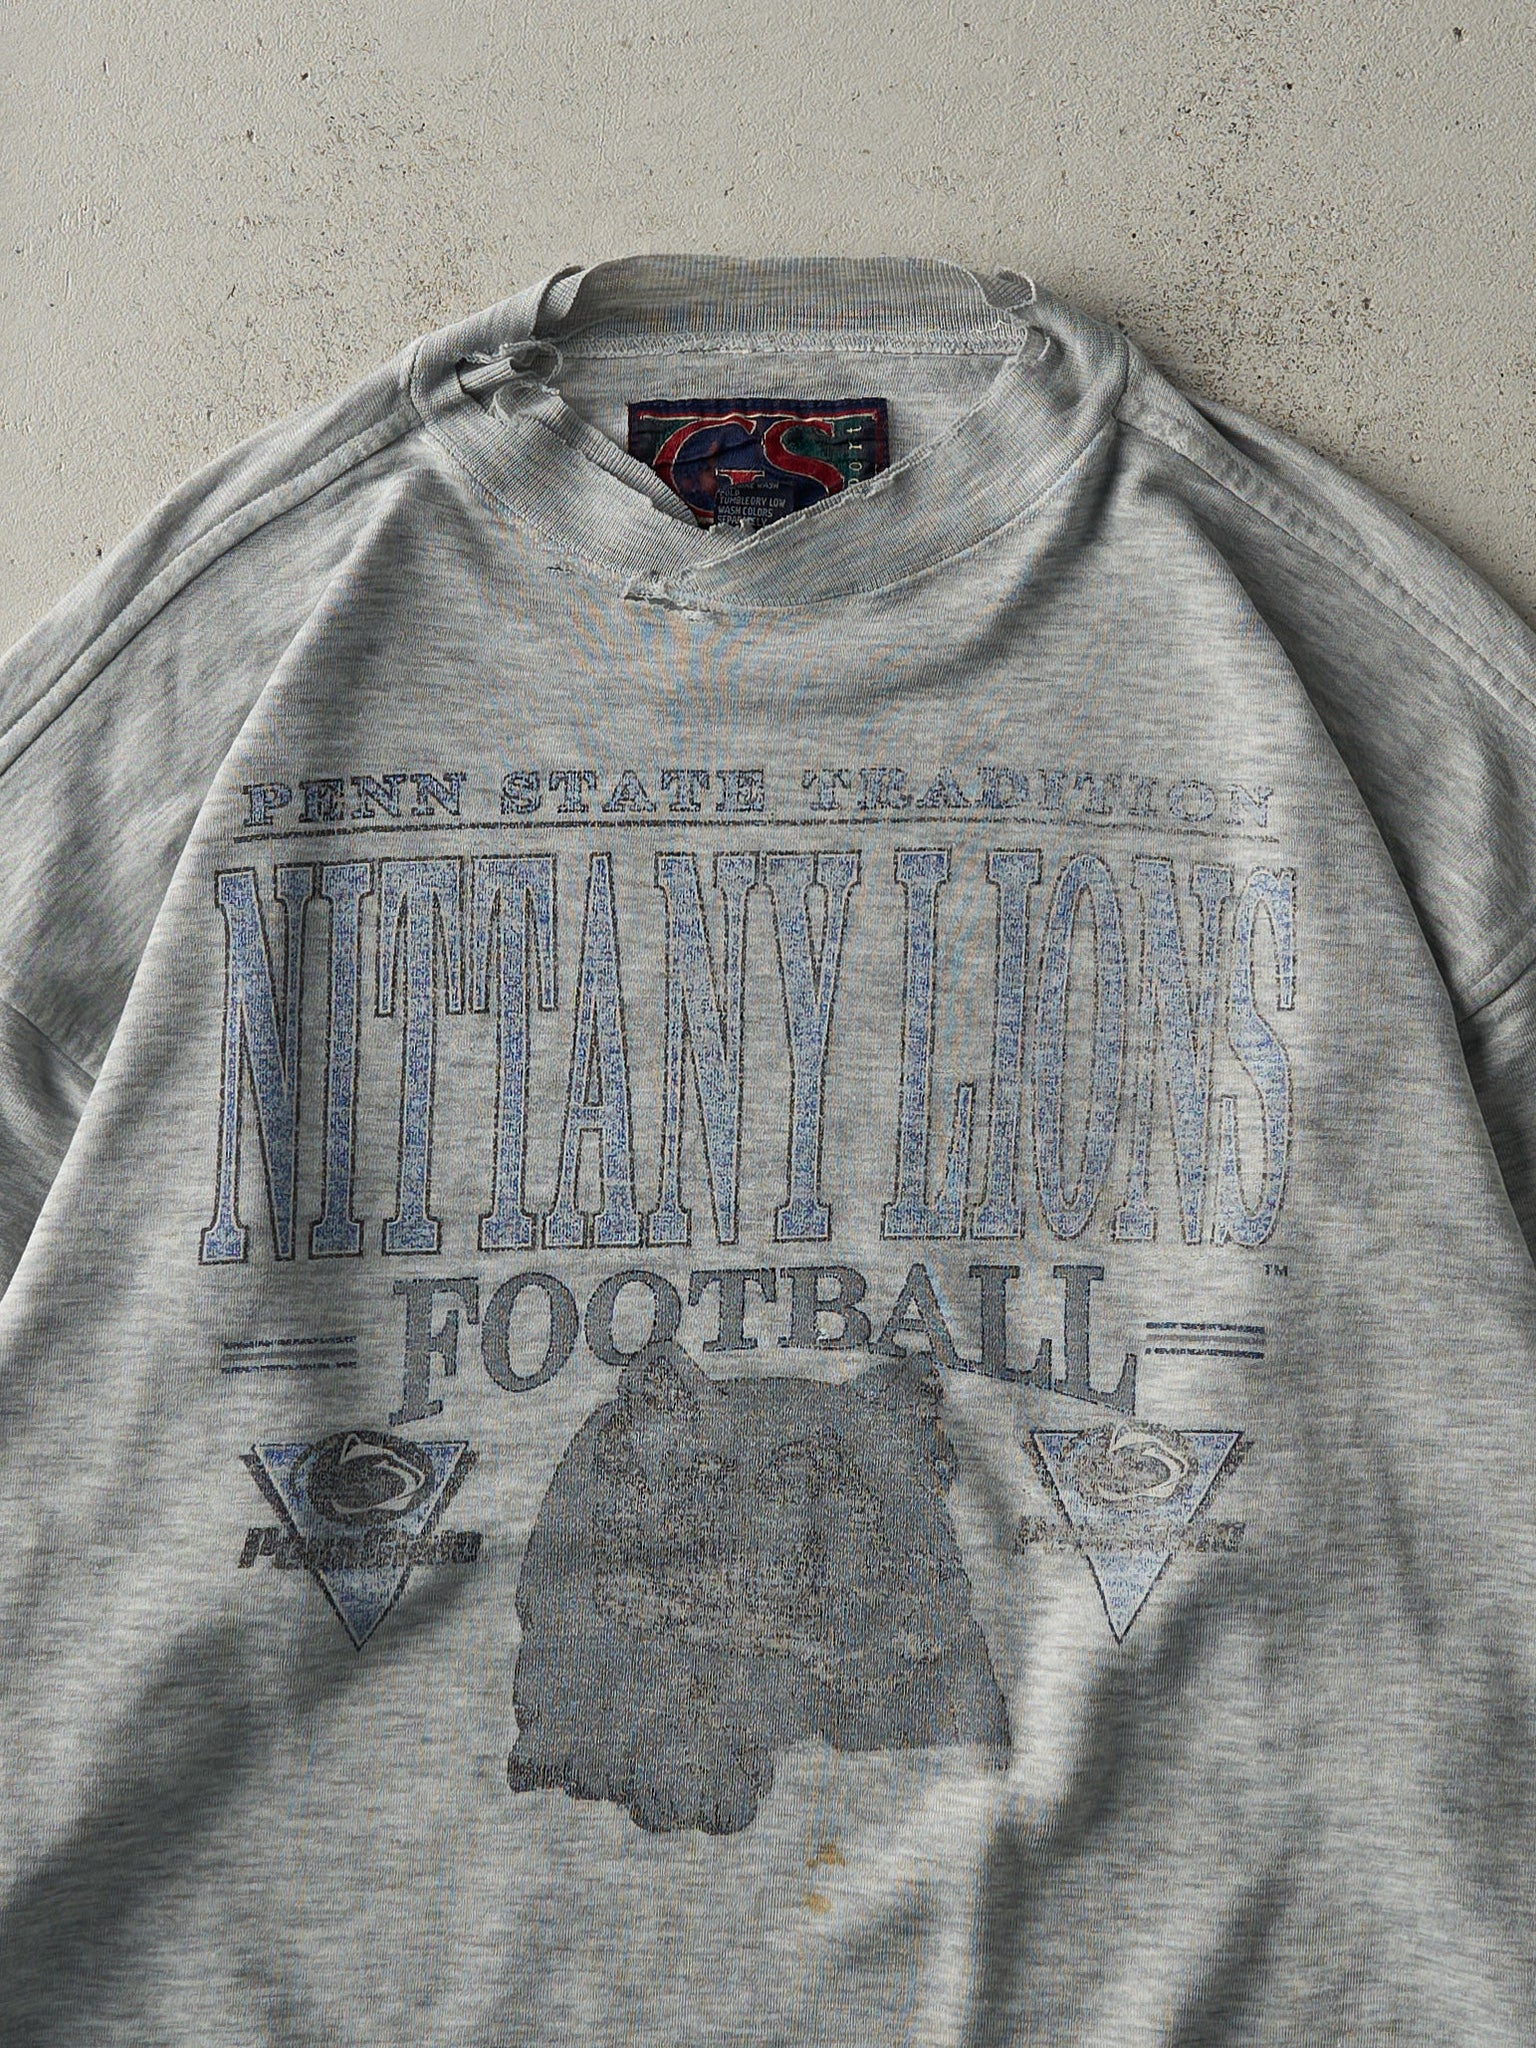 Vintage 90s Grey Penn State Nittany Lions Football Light Weight Crewneck (L)